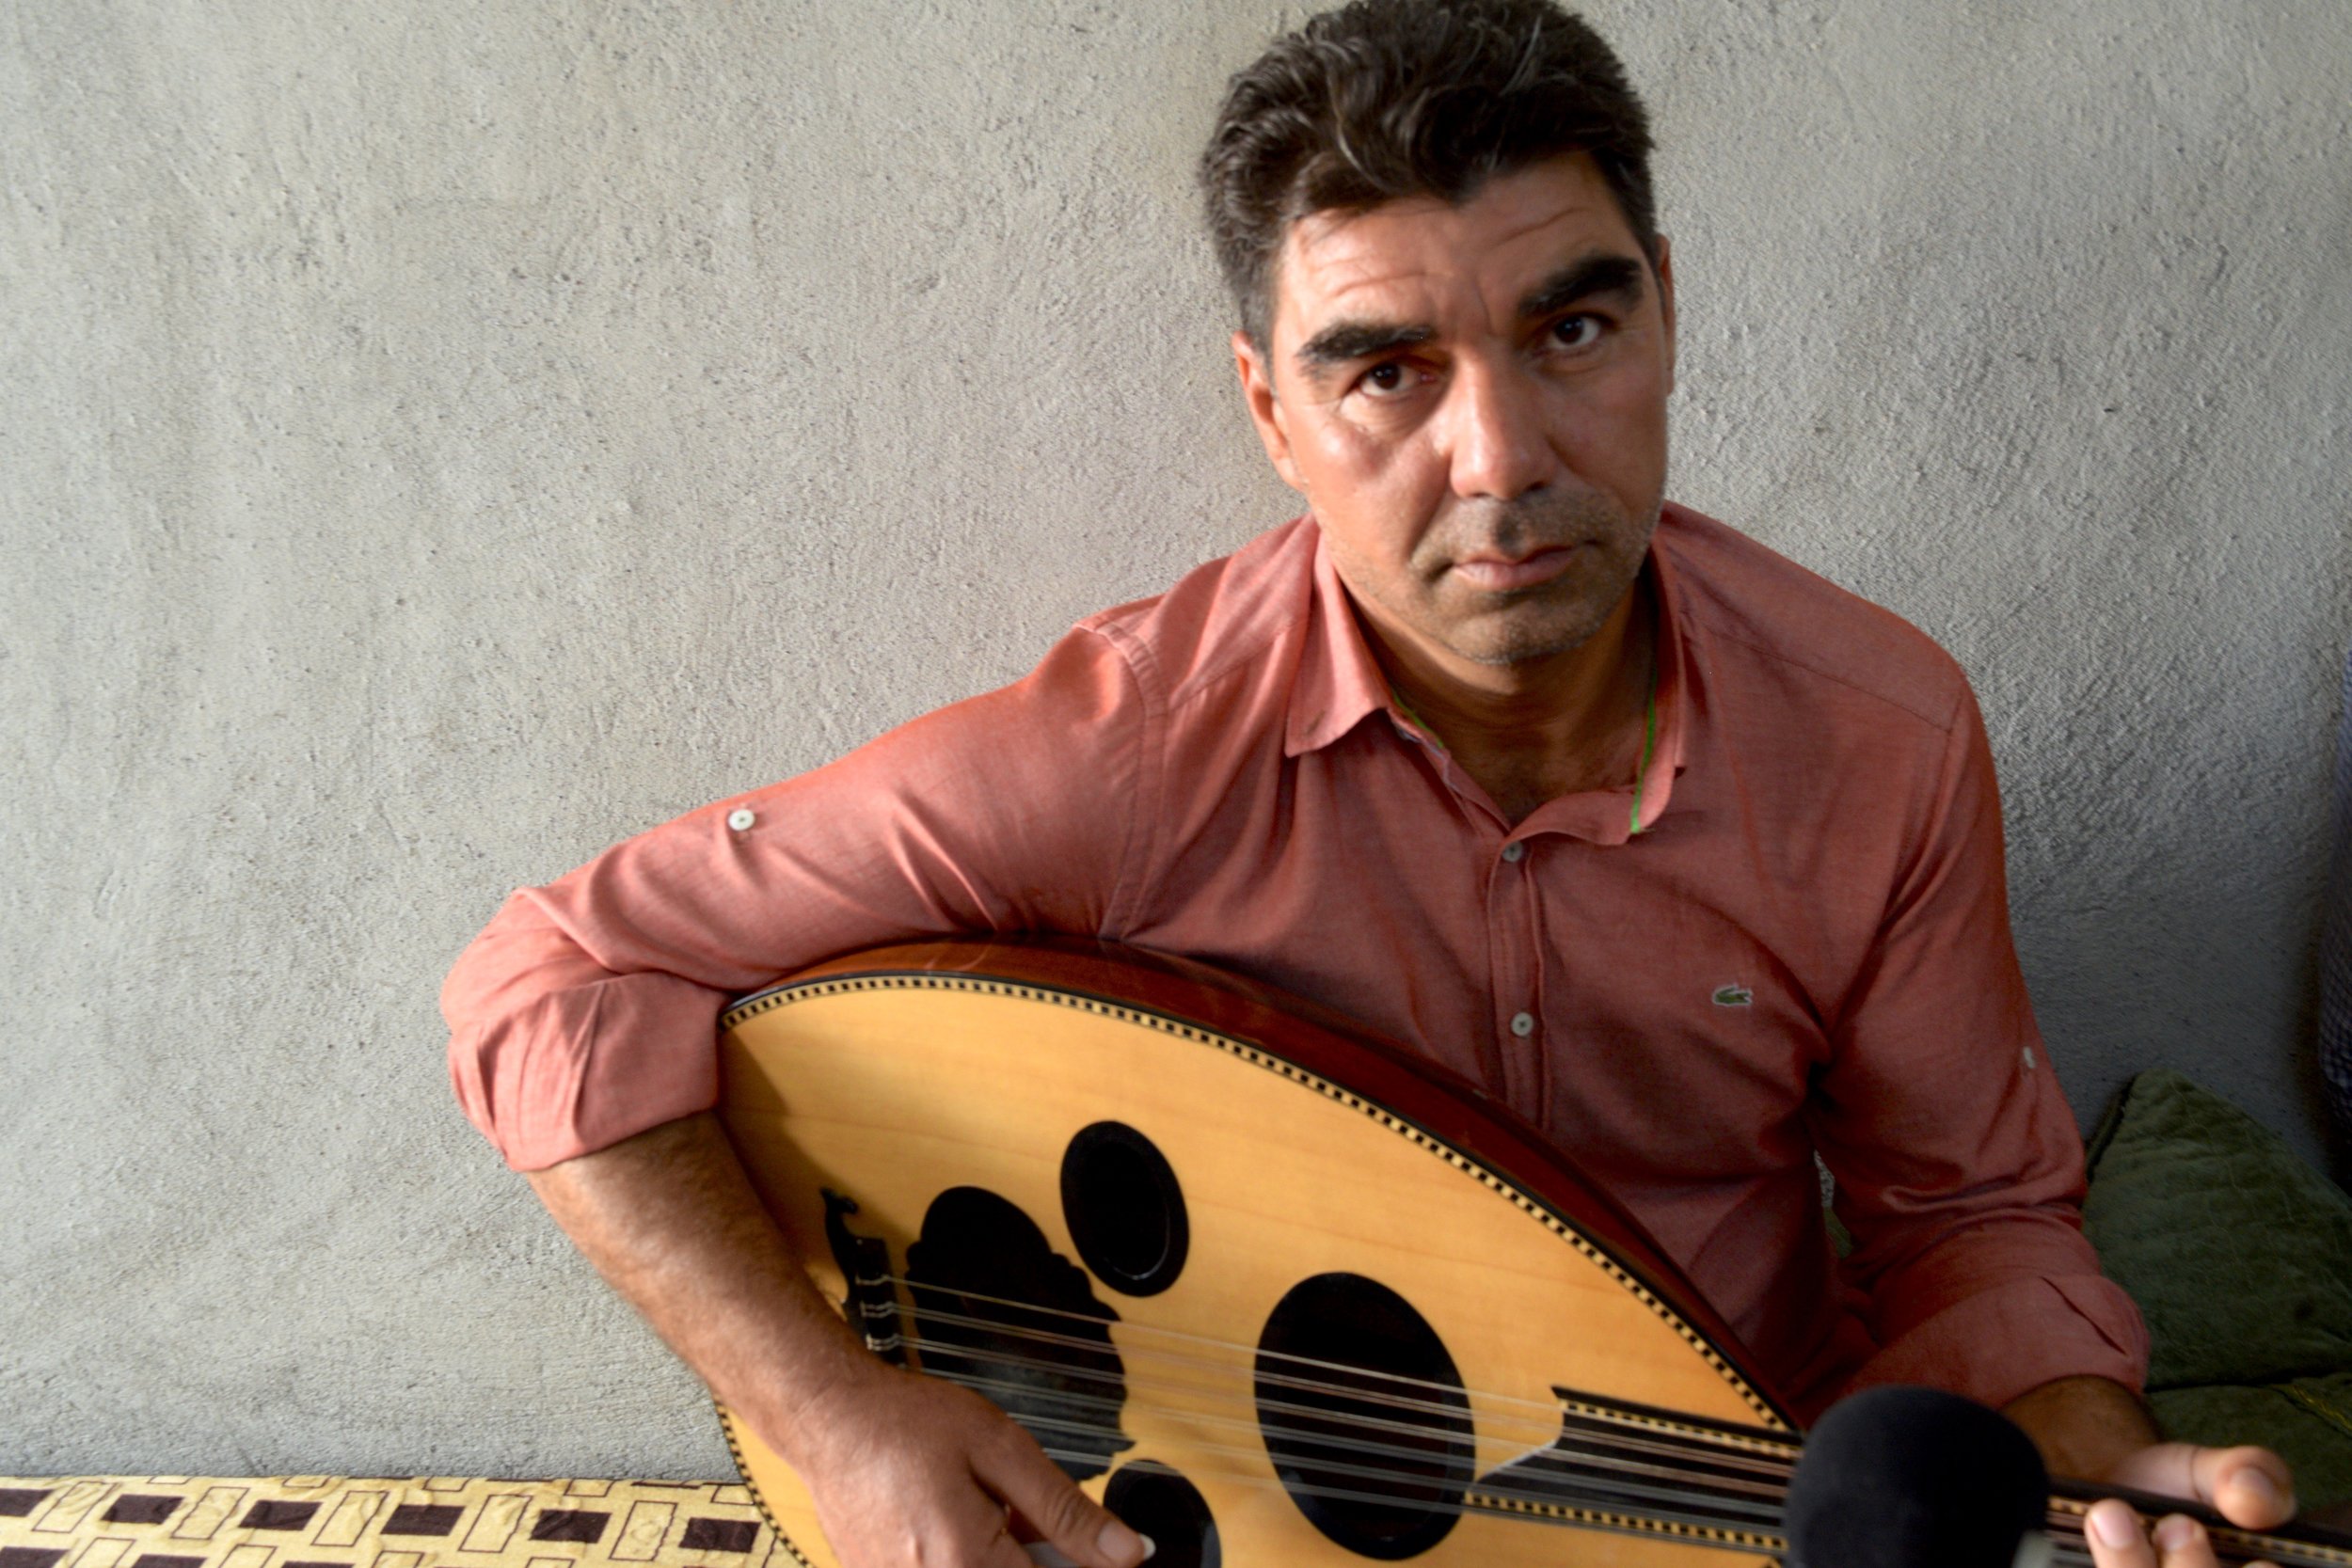 Ali is a Syrian musician now living in Iraq. To learn more about his story, go to musicinexile.org